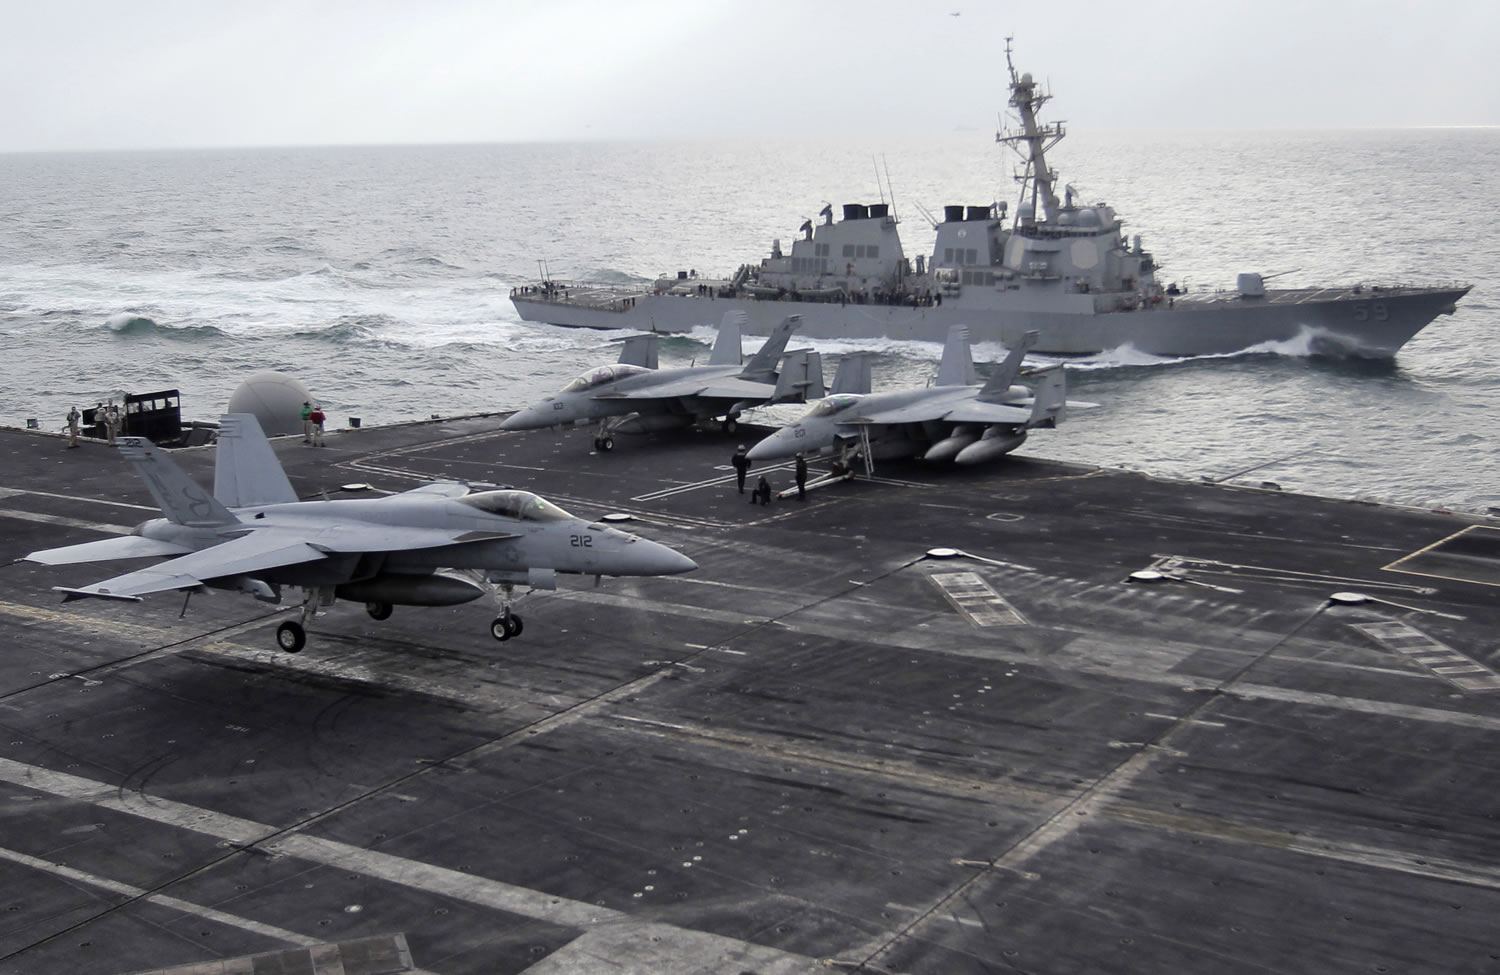 Associated Press files
A U.S. F-18 fighter jet, left, lands Feb. 13, 2012, on the Nimitz-class aircraft carrier USS Abraham Lincoln as a U.S. destroyer sails alongside during fly exercises in the Persian Gulf. Iran's naval chief said Tuesday the nation is building a large-scale mock-up of a U.S. carrier for target practice.